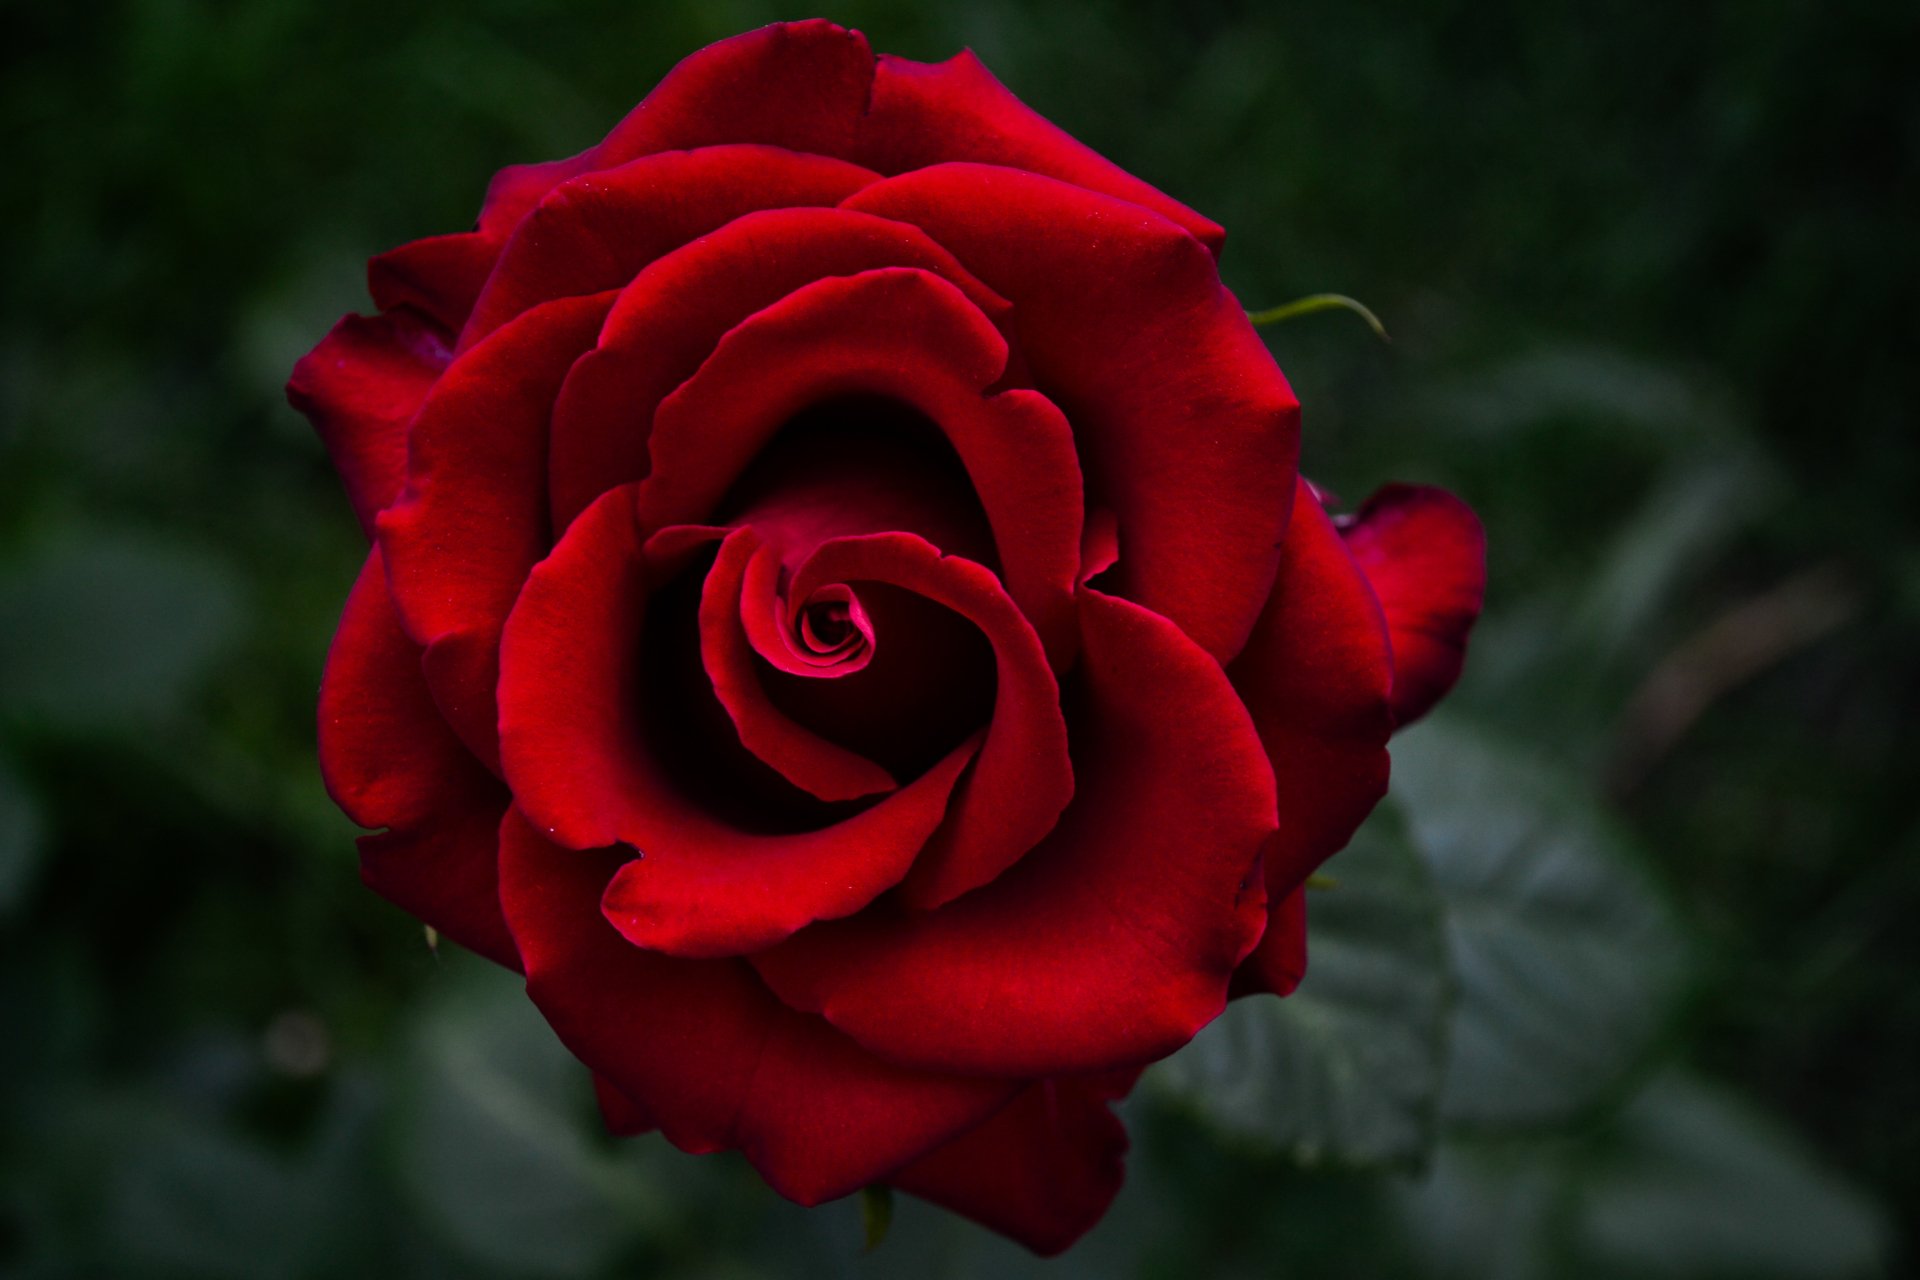 4608x3072 Beautiful Red Rose Wallpaper Background Image. 